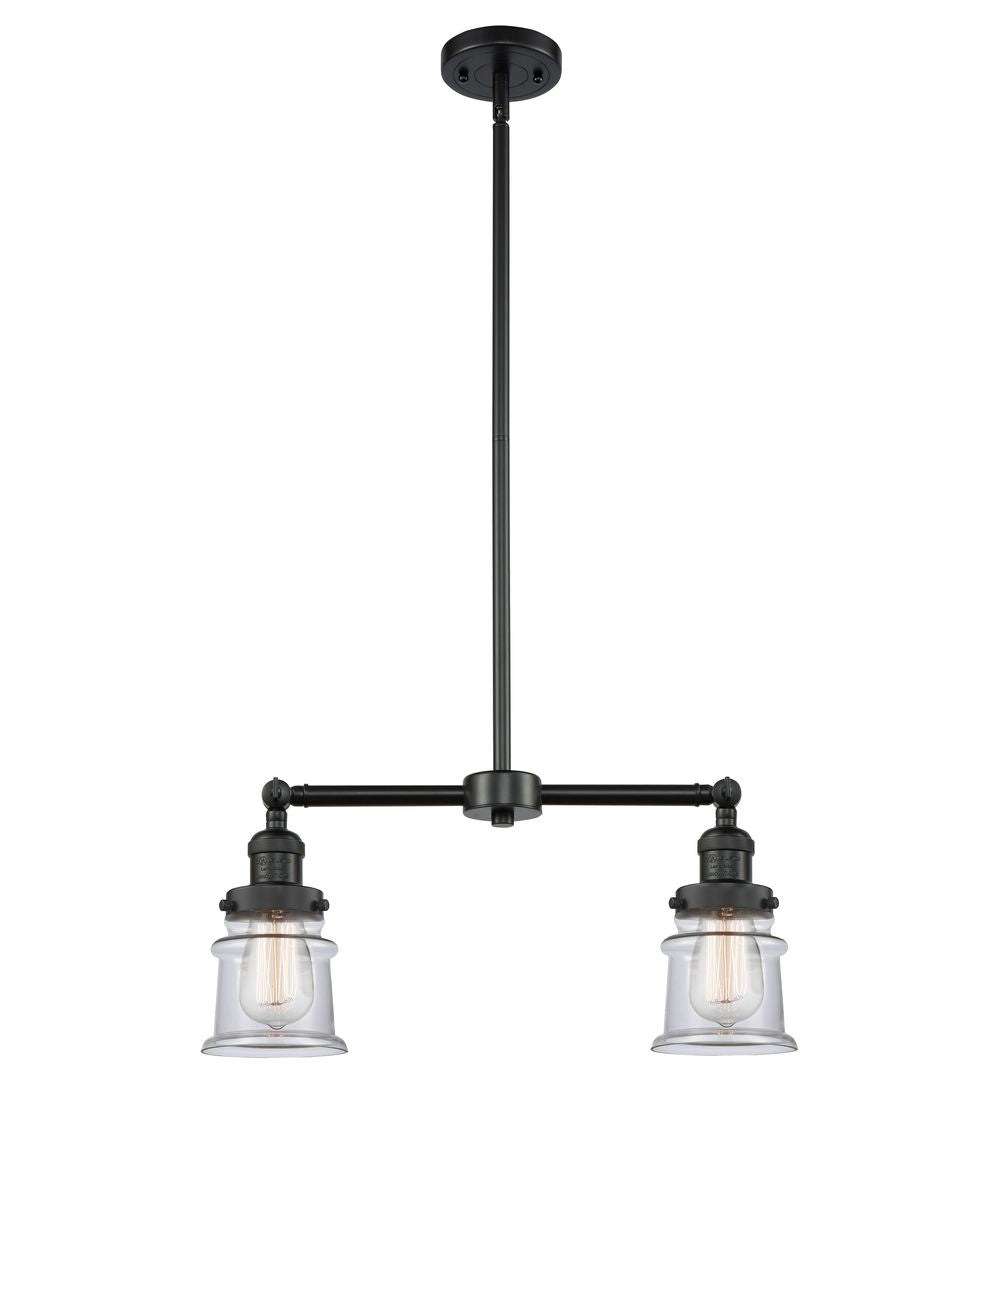 209-BK-G182S 2-Light 21" Matte Black Island Light - Clear Small Canton Glass - LED Bulb - Dimmensions: 21 x 5 x 10<br>Minimum Height : 20.625<br>Maximum Height : 44.625 - Sloped Ceiling Compatible: Yes